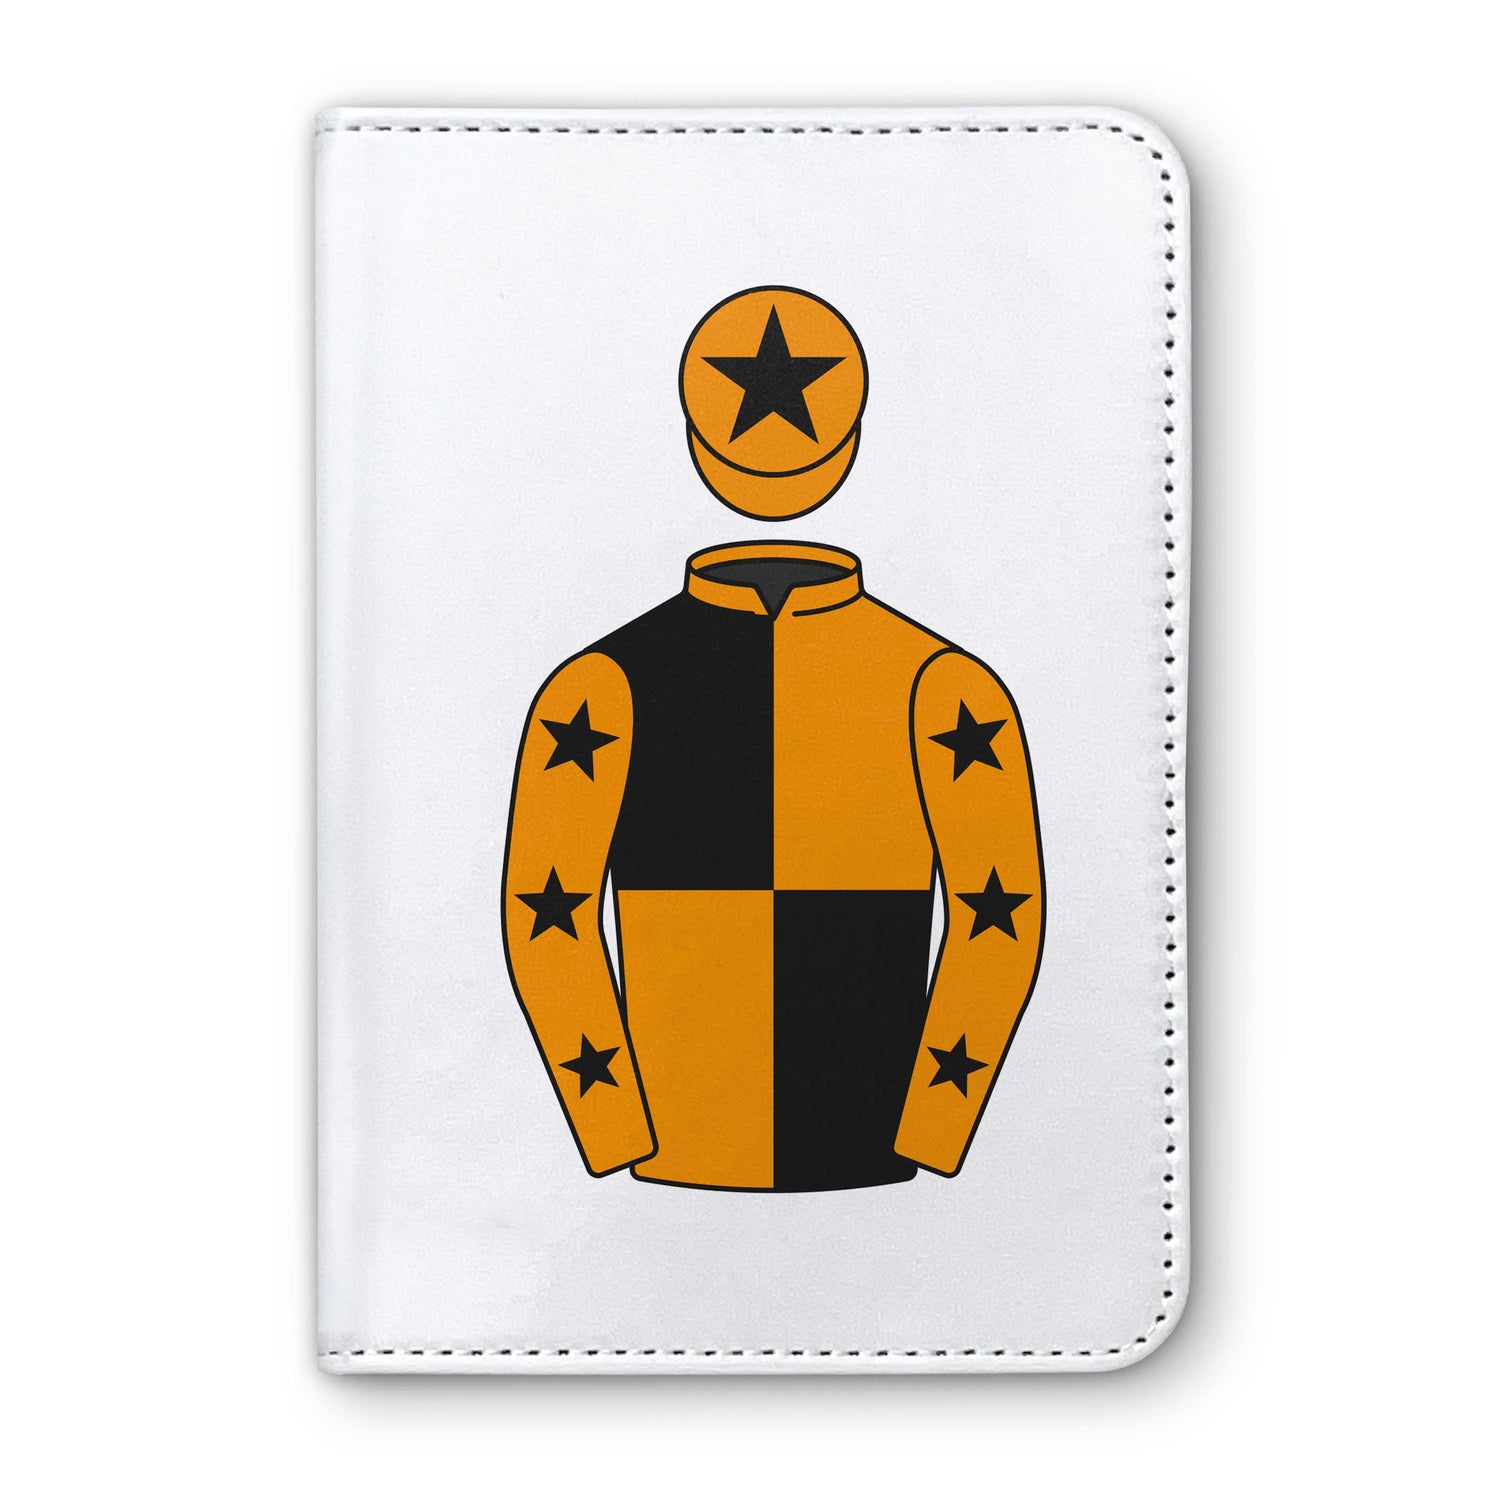 One For Luck Racing Syndicate Horse Racing Passport Holder - Hacked Up Horse Racing Gifts